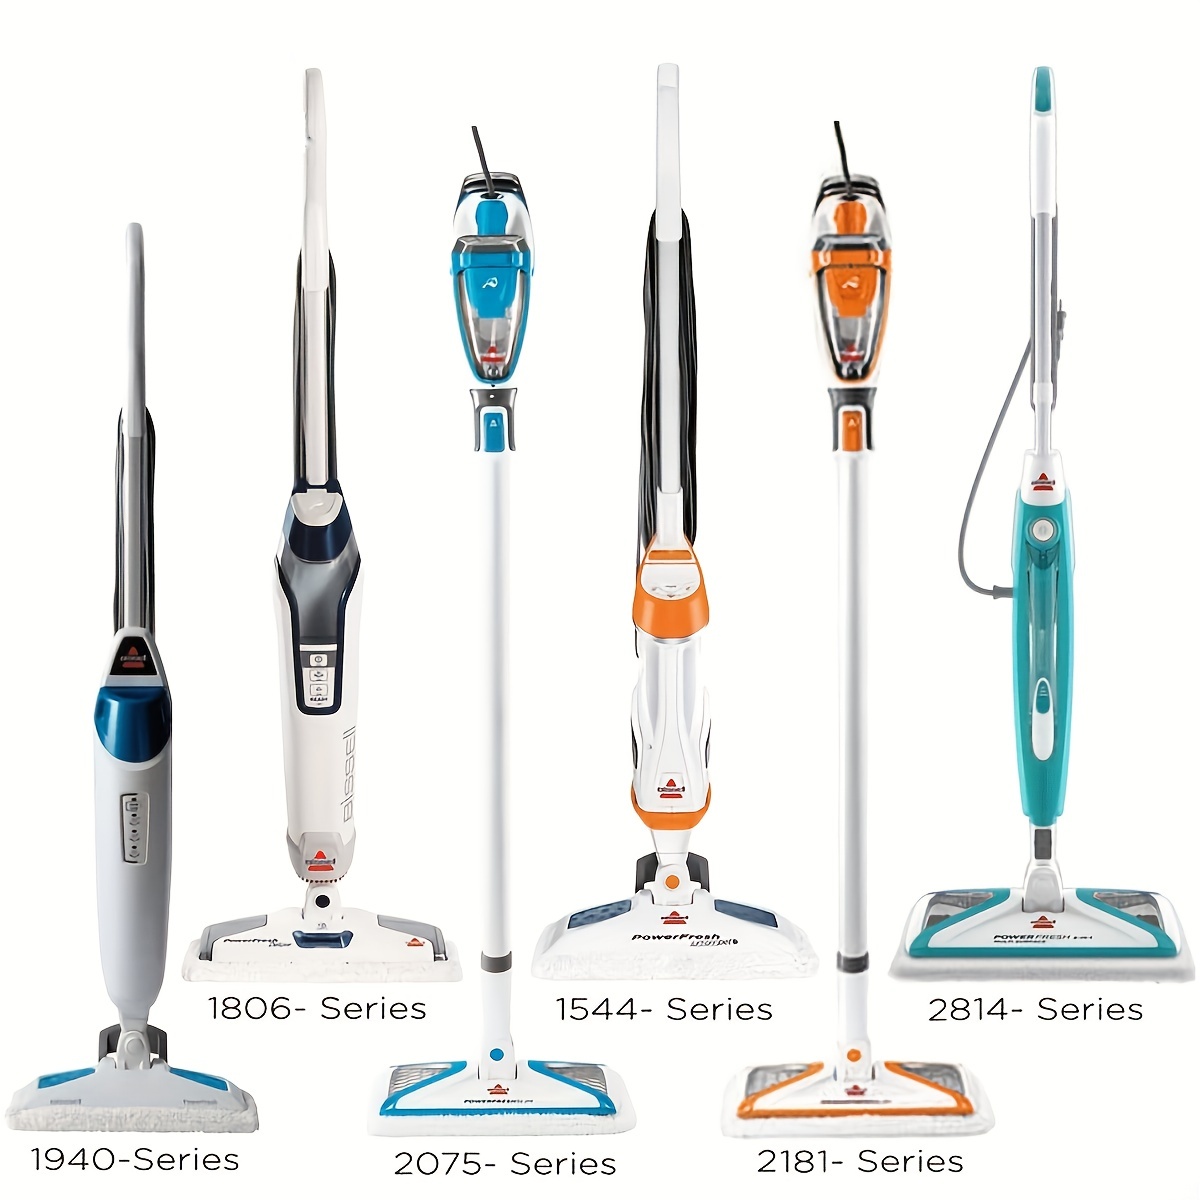 The Bissell PowerFresh Steam Mop Is on Sale at